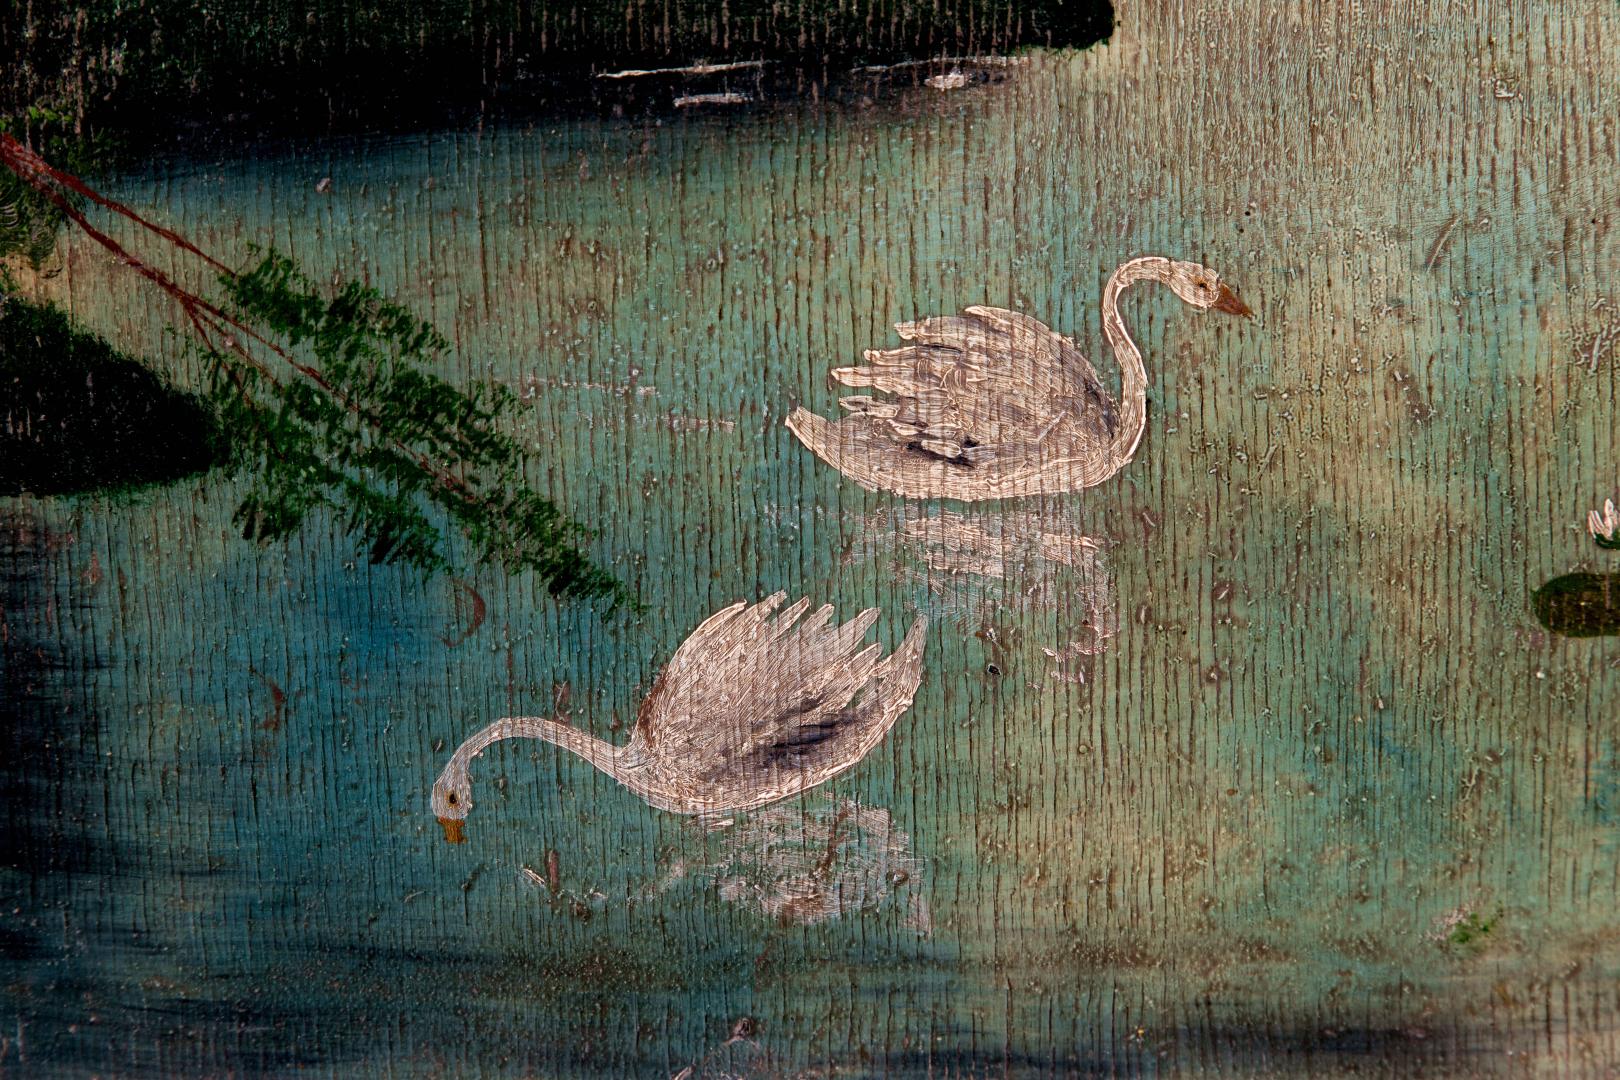 Landscape with swans